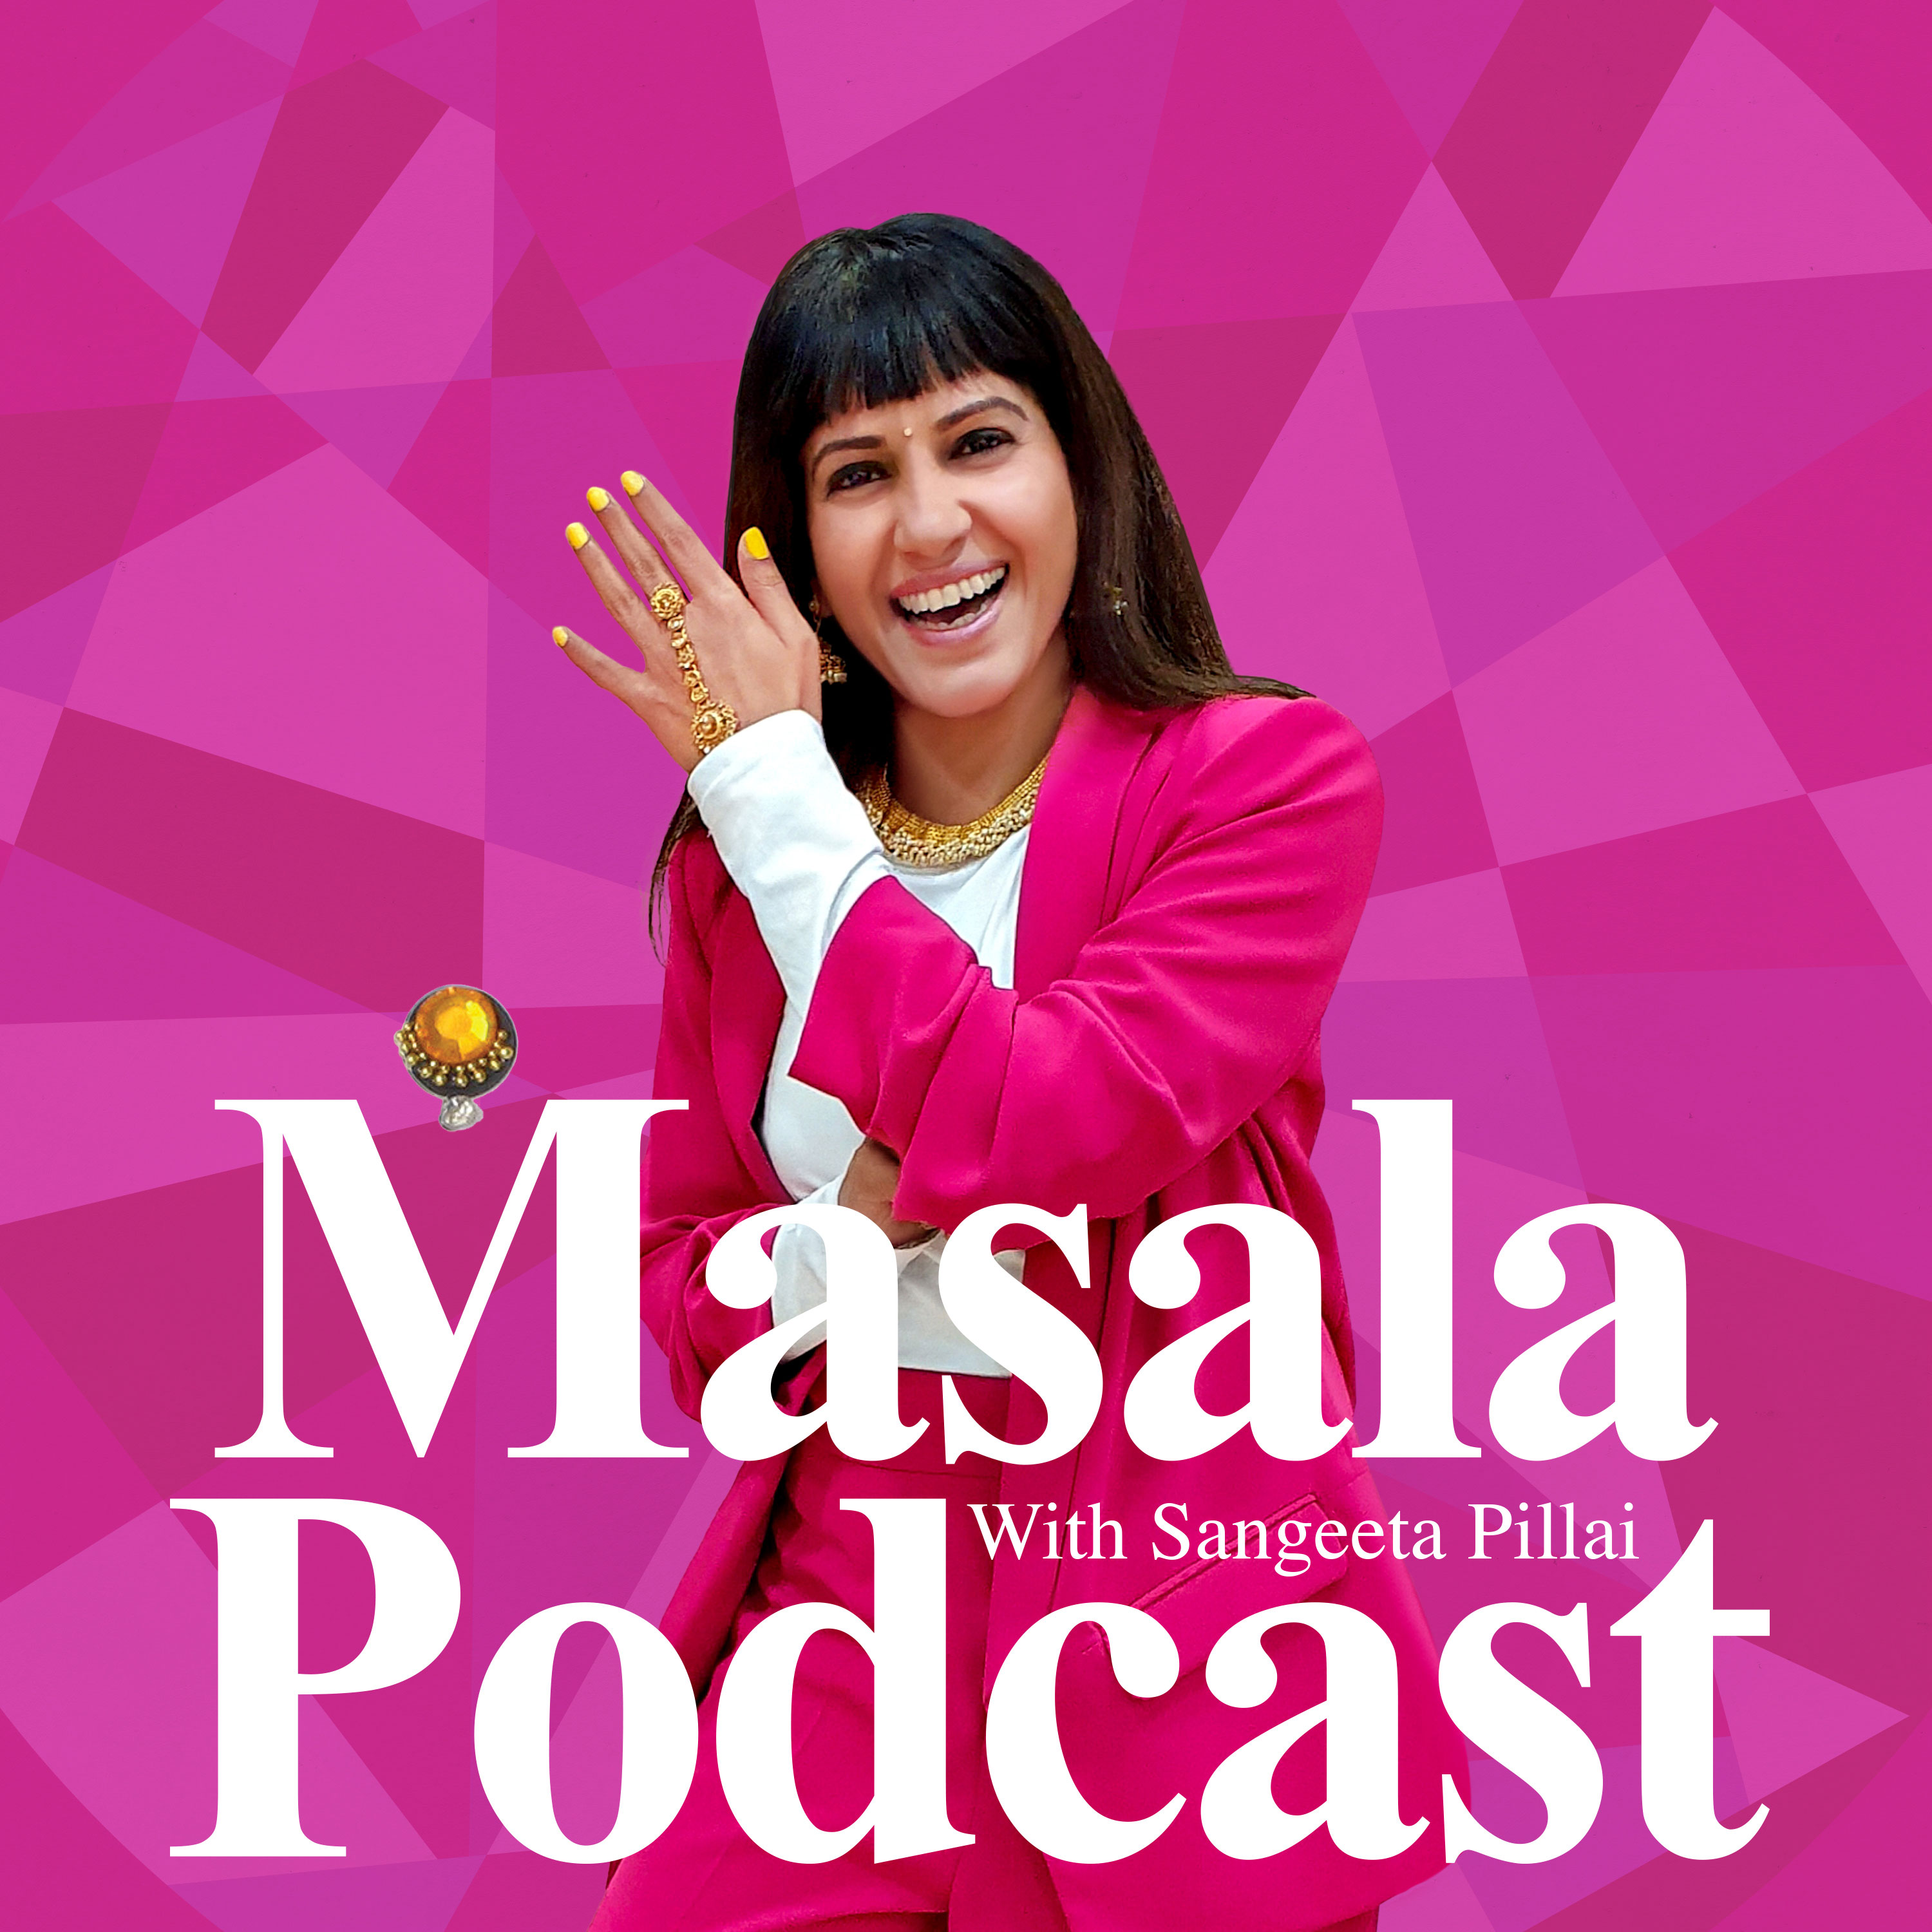 Masala Podcast: The South Asian feminist podcast podcast show image